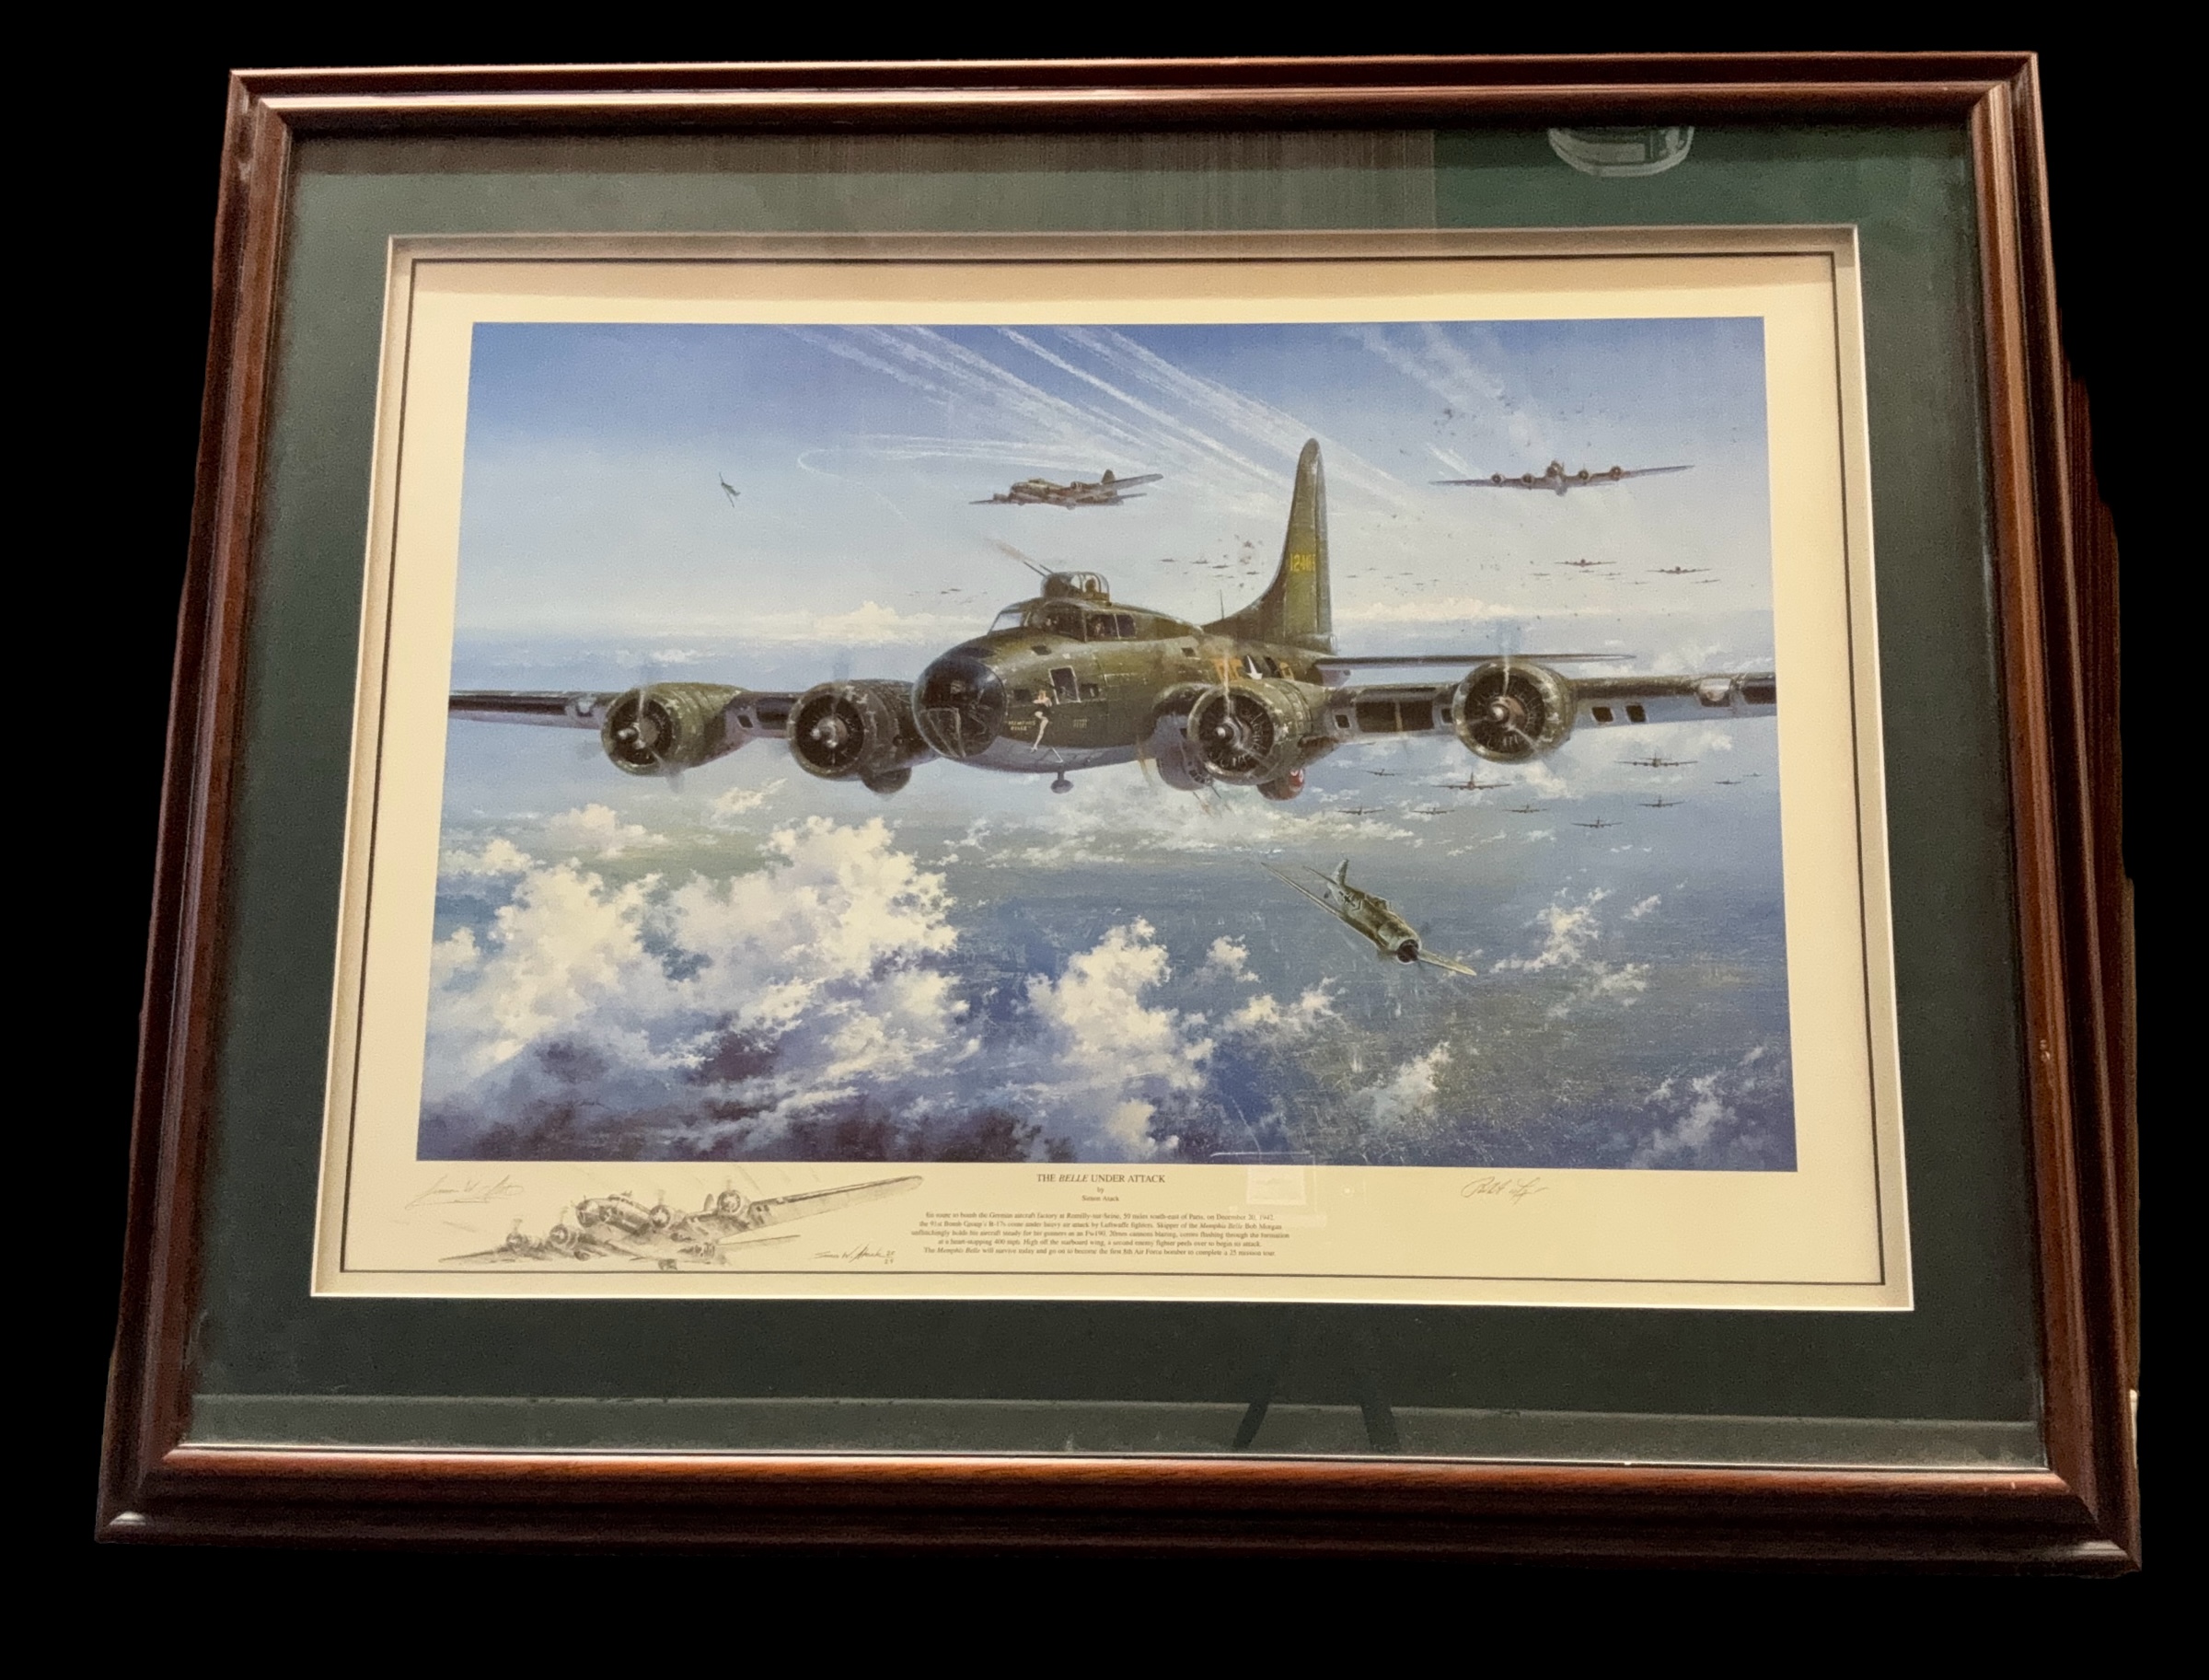 The Belle Under Attack WWII 36x30 inch print framed and mounted signed in pencil by the artist Simon - Image 2 of 3